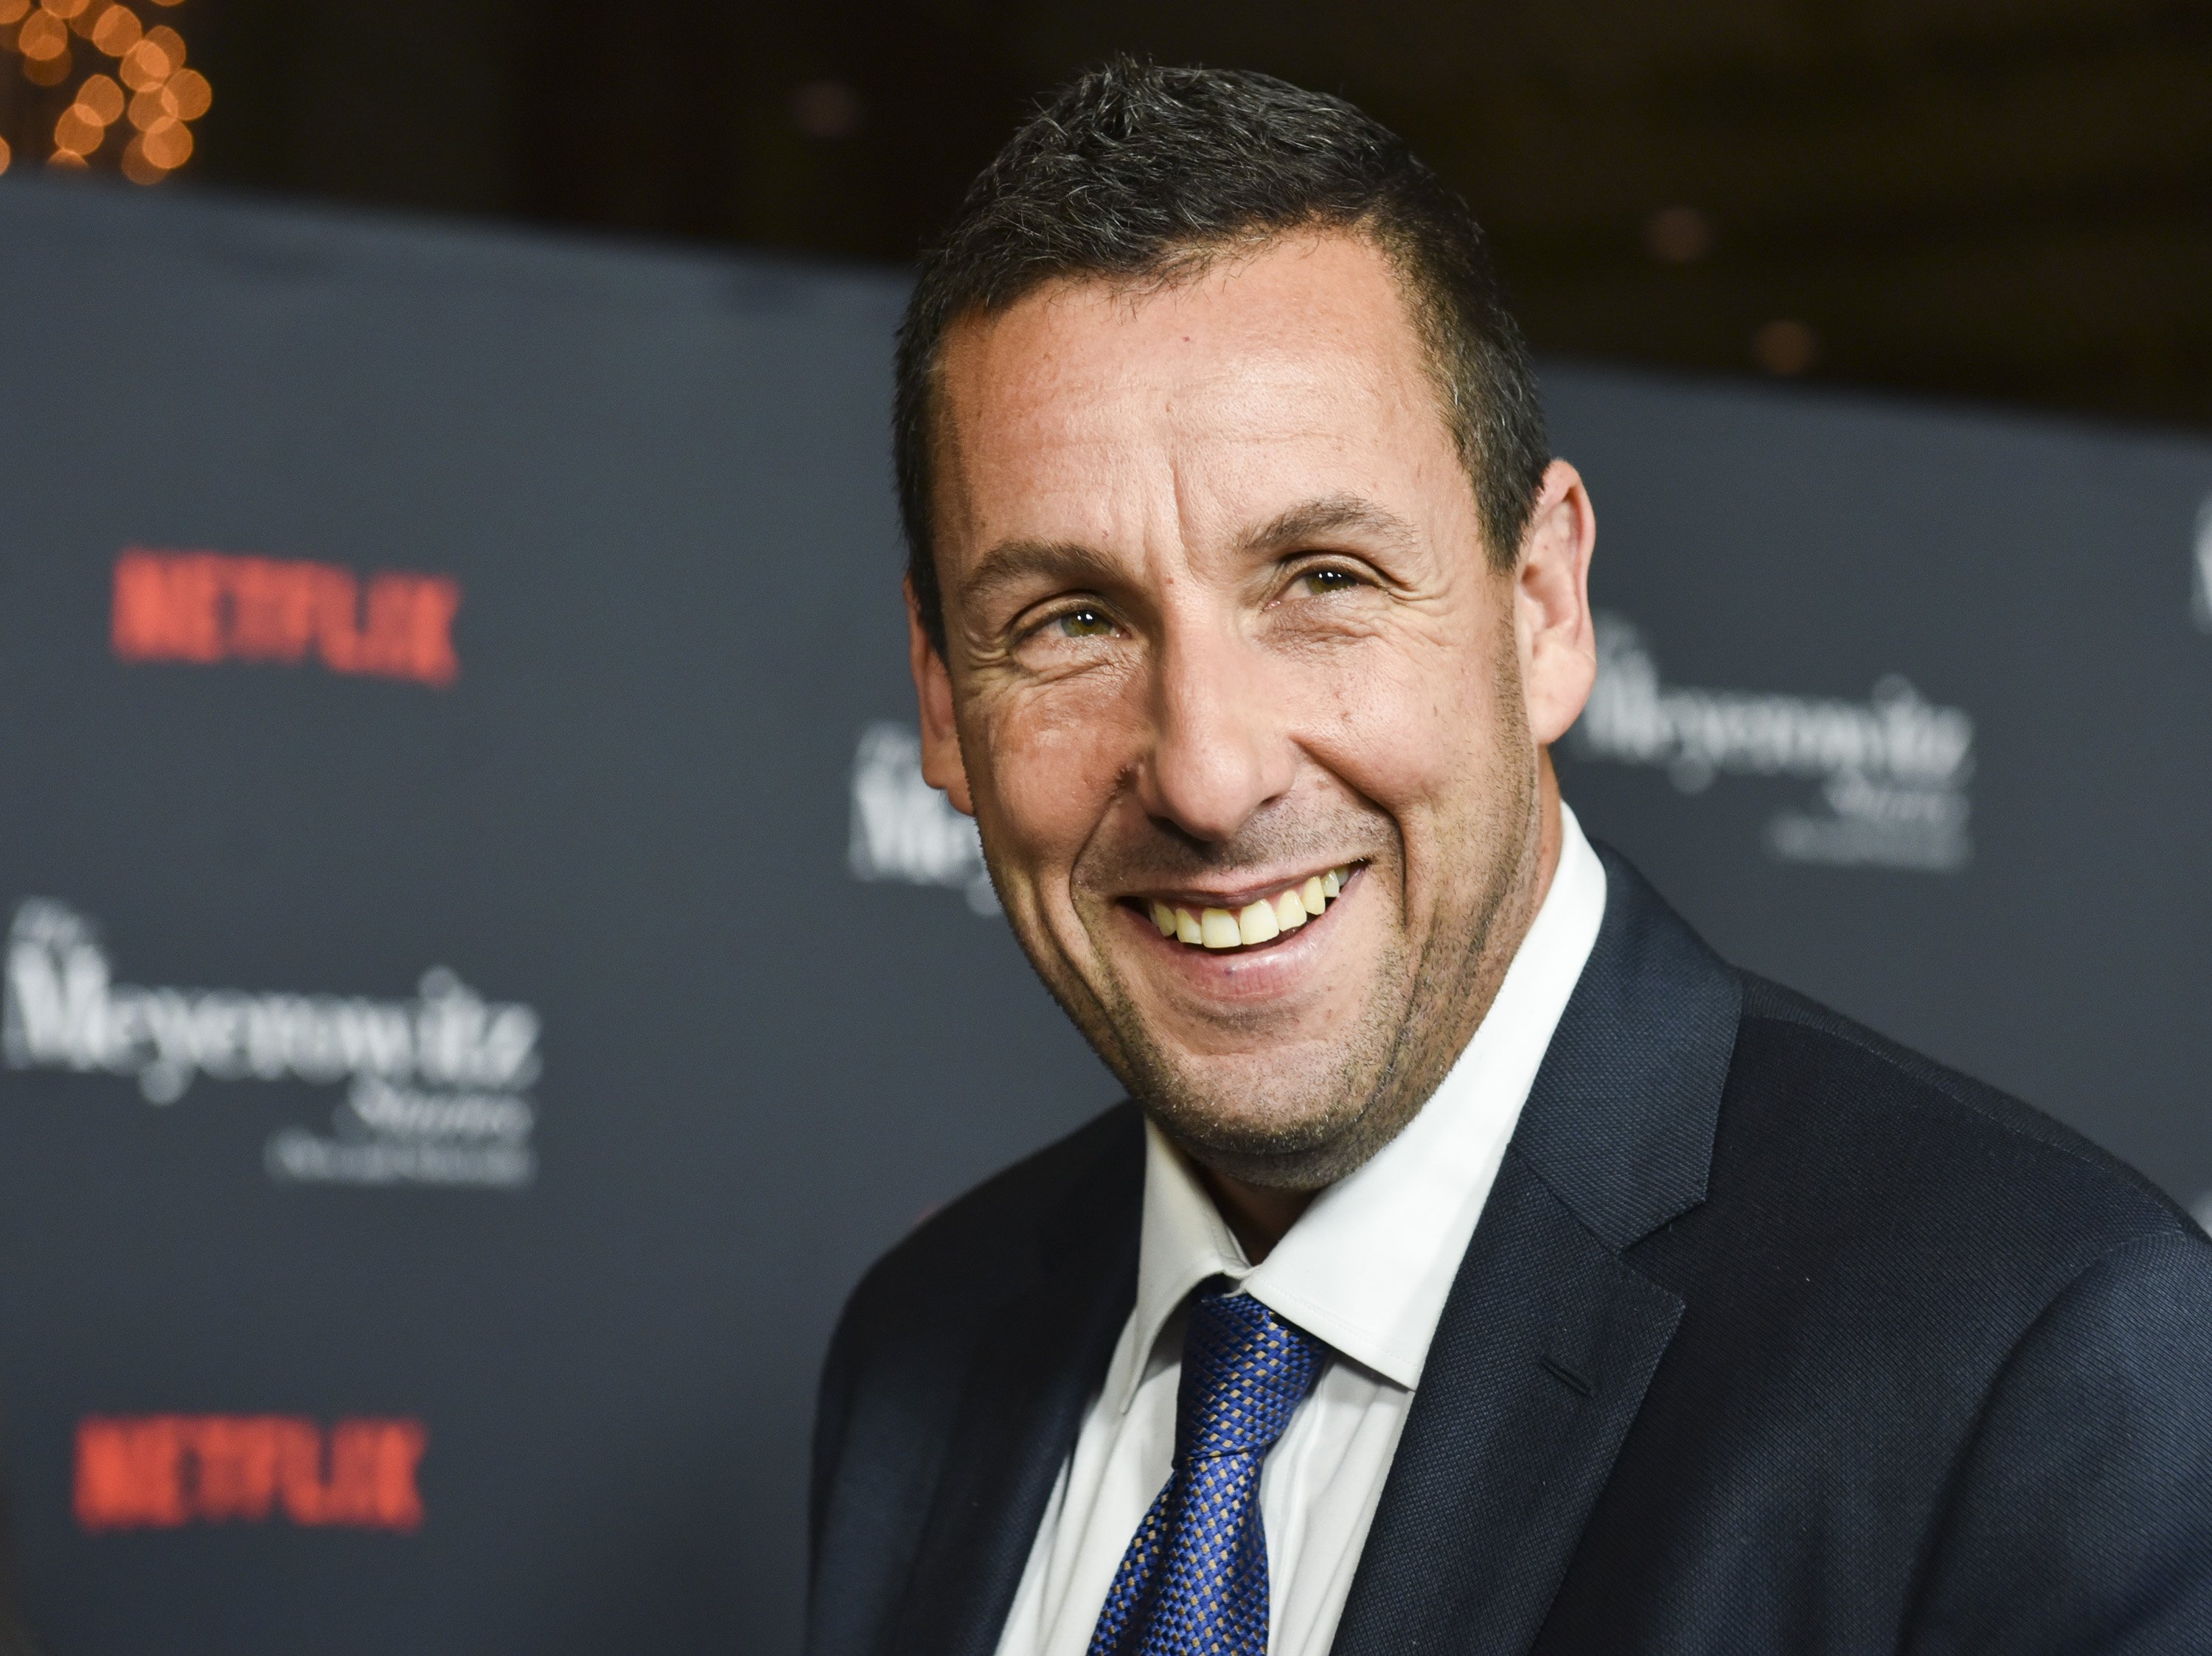 Adam Sandler attends screening of Netflix's "The Meyerowitz Stories (New And Selected)" at Directors Guild Of America on October 11, 2017 in Los Angeles, California. | Source: Getty Images